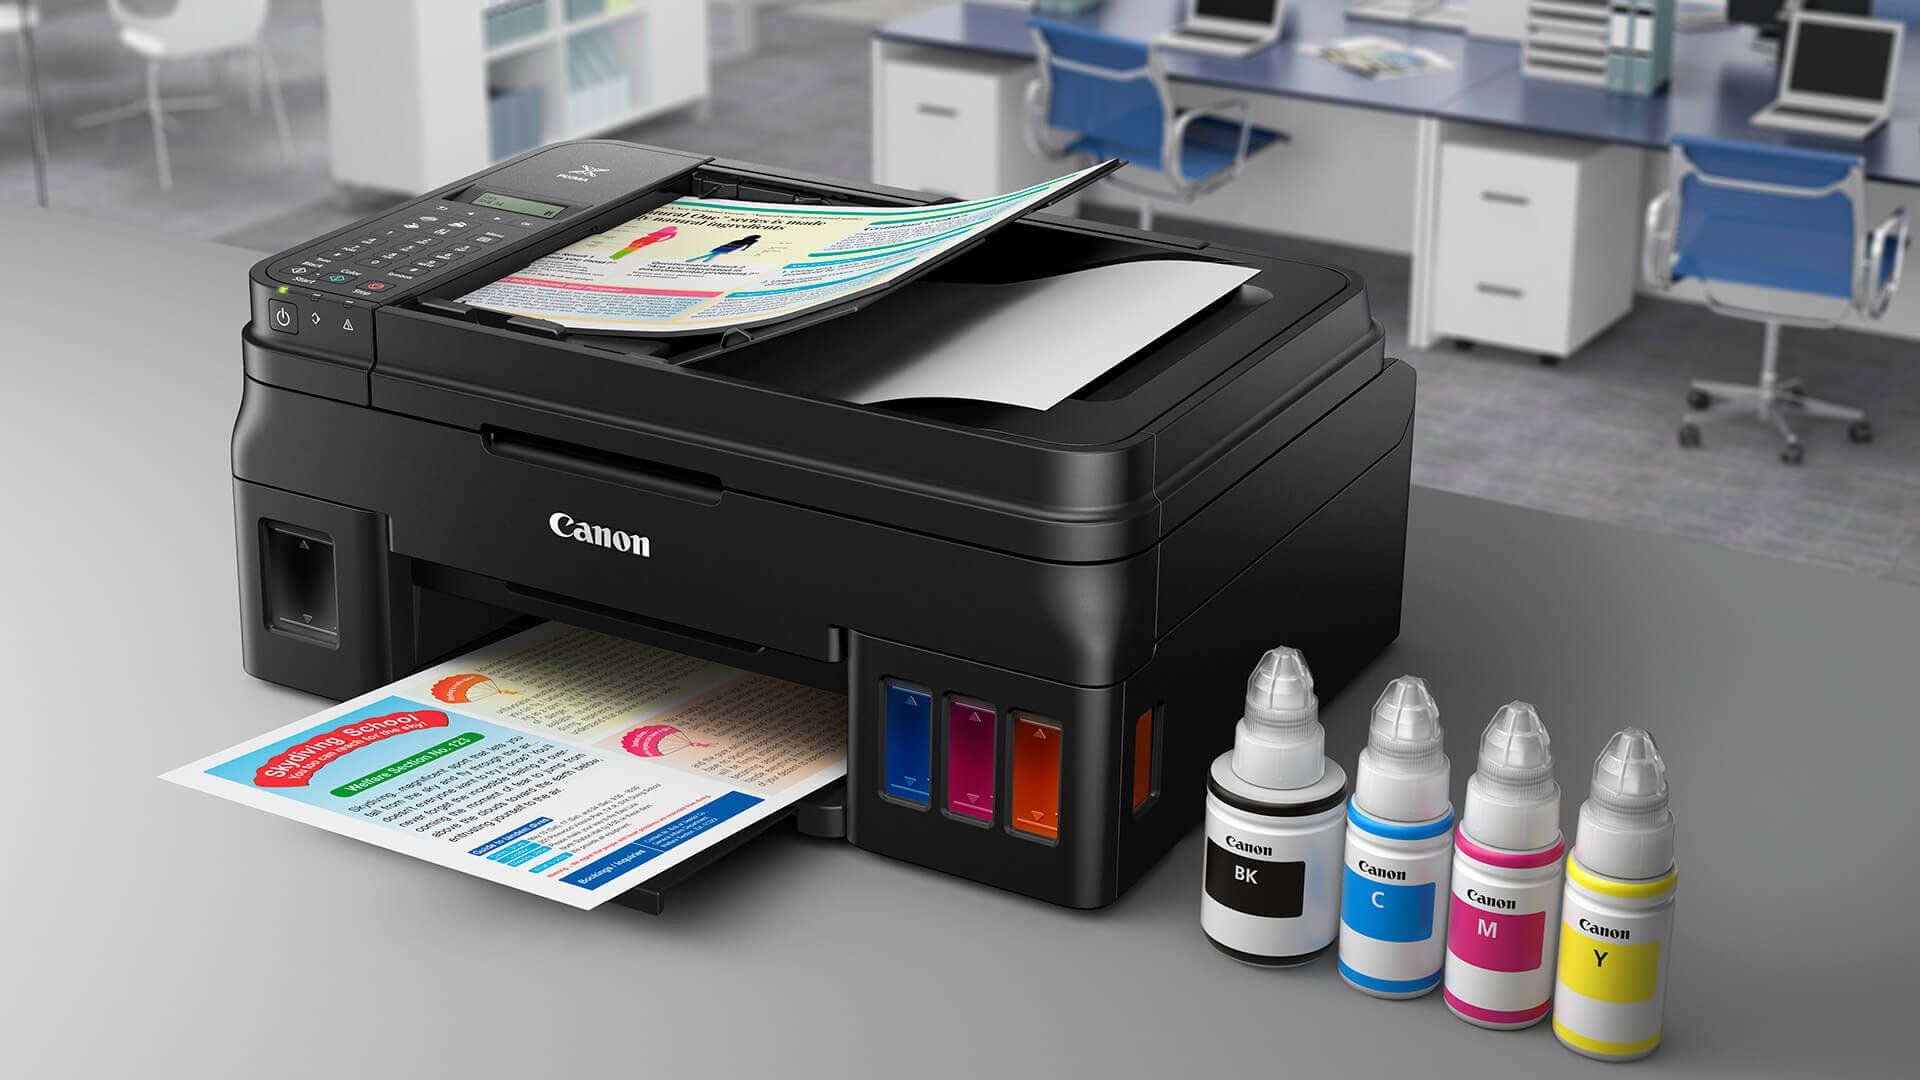 Tips to Maximize Your Resources with Canon Printers